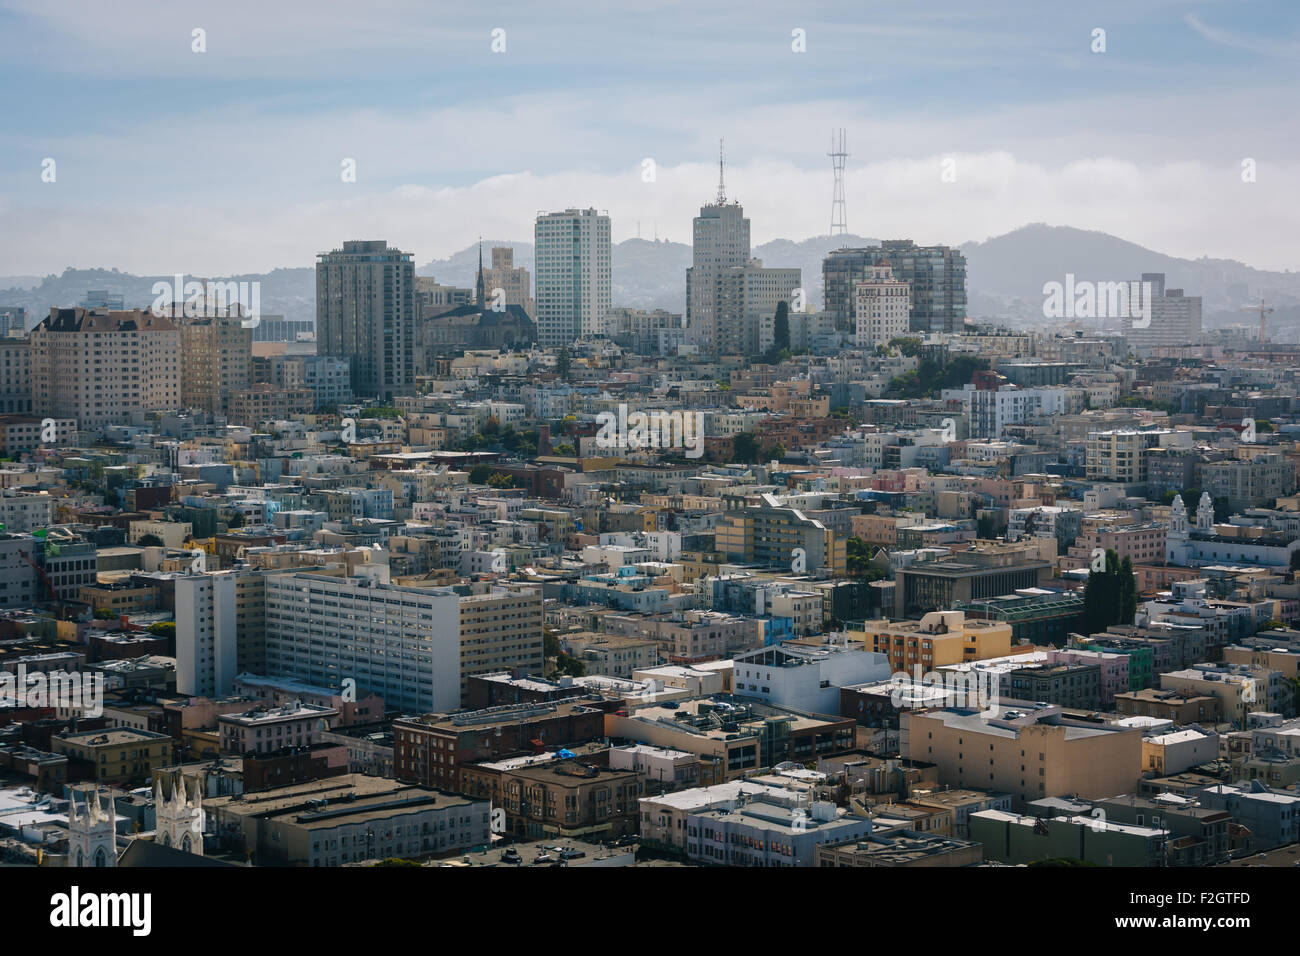 View from the Coit Tower in San Francisco, California. Stock Photo